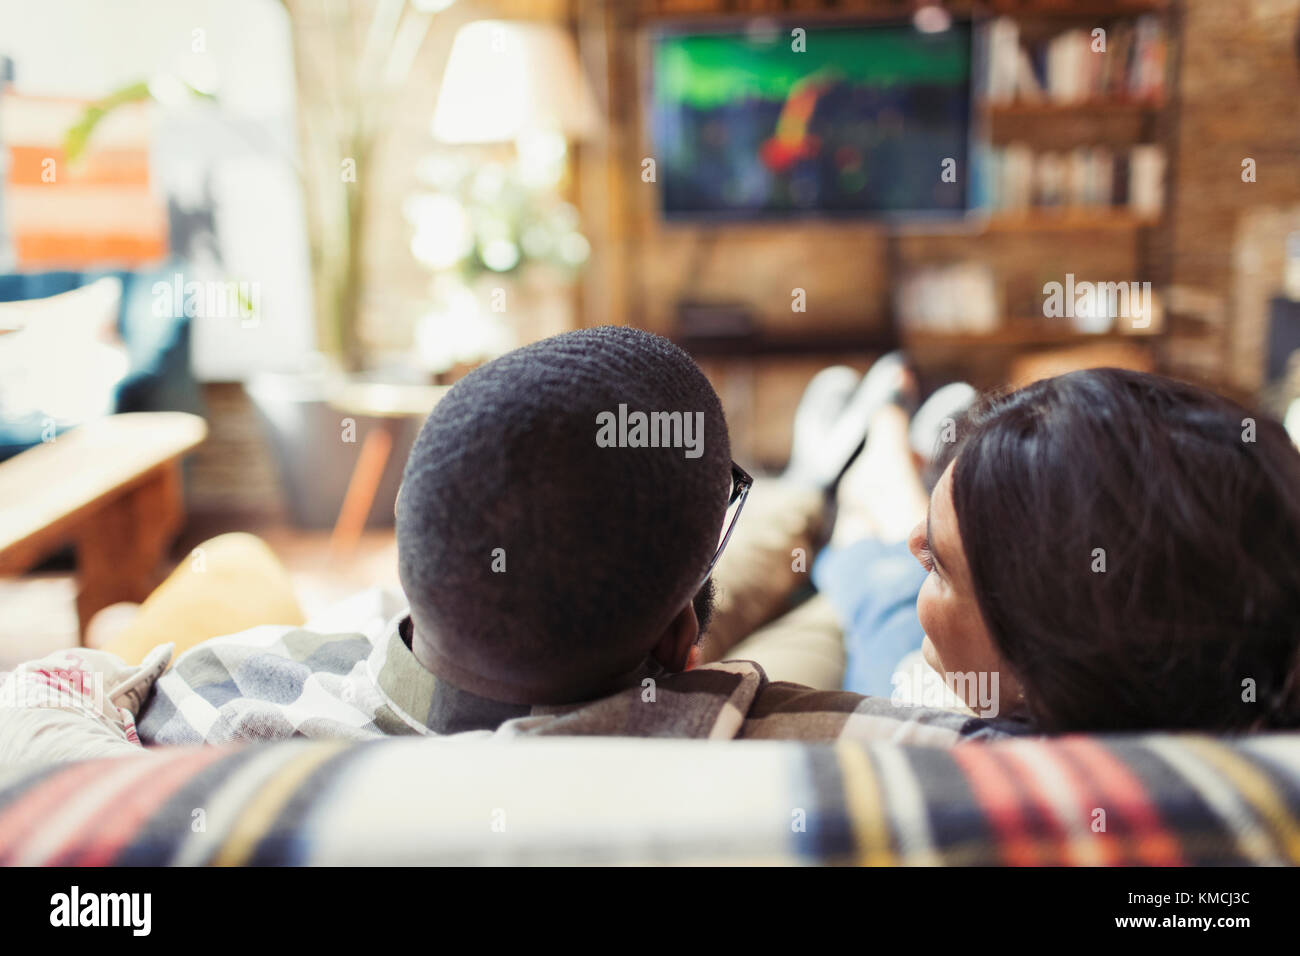 Young couple relaxing, watching TV on living room sofa Stock Photo